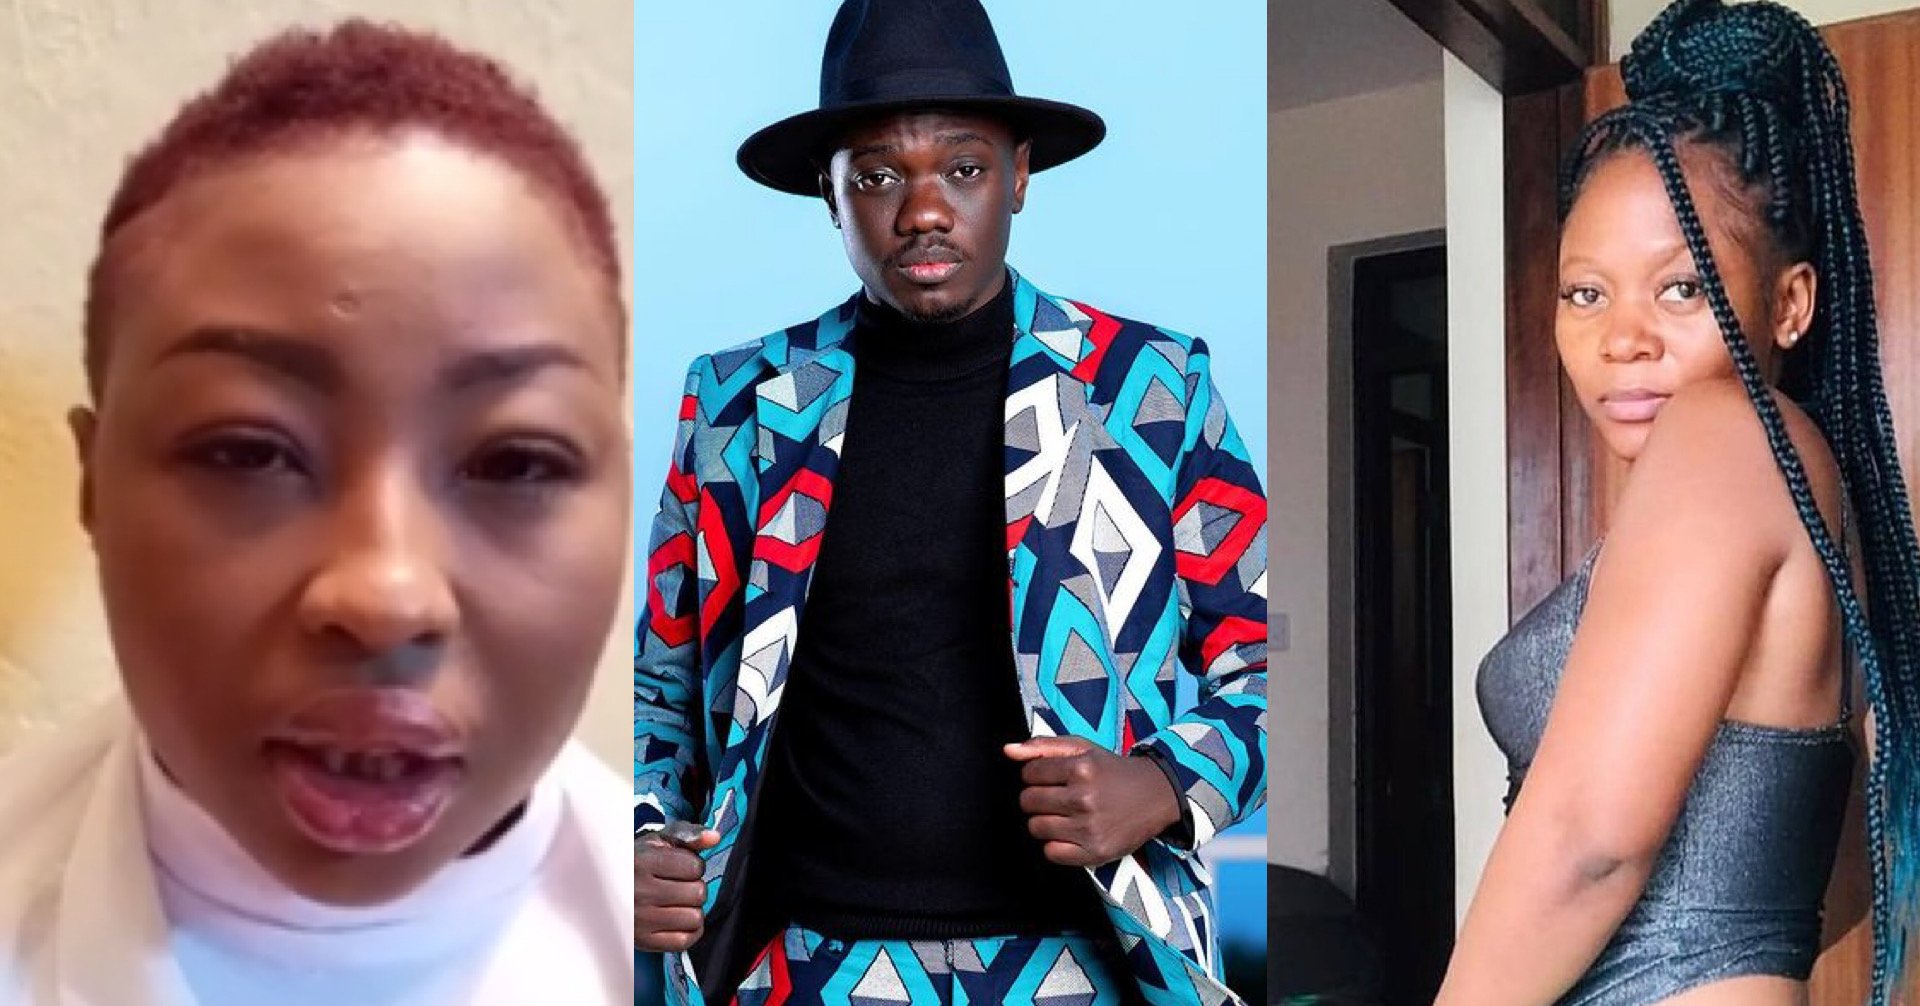 Eddie Butita reacts to Sosuun and Viviane’s fight, compares it to a high school play